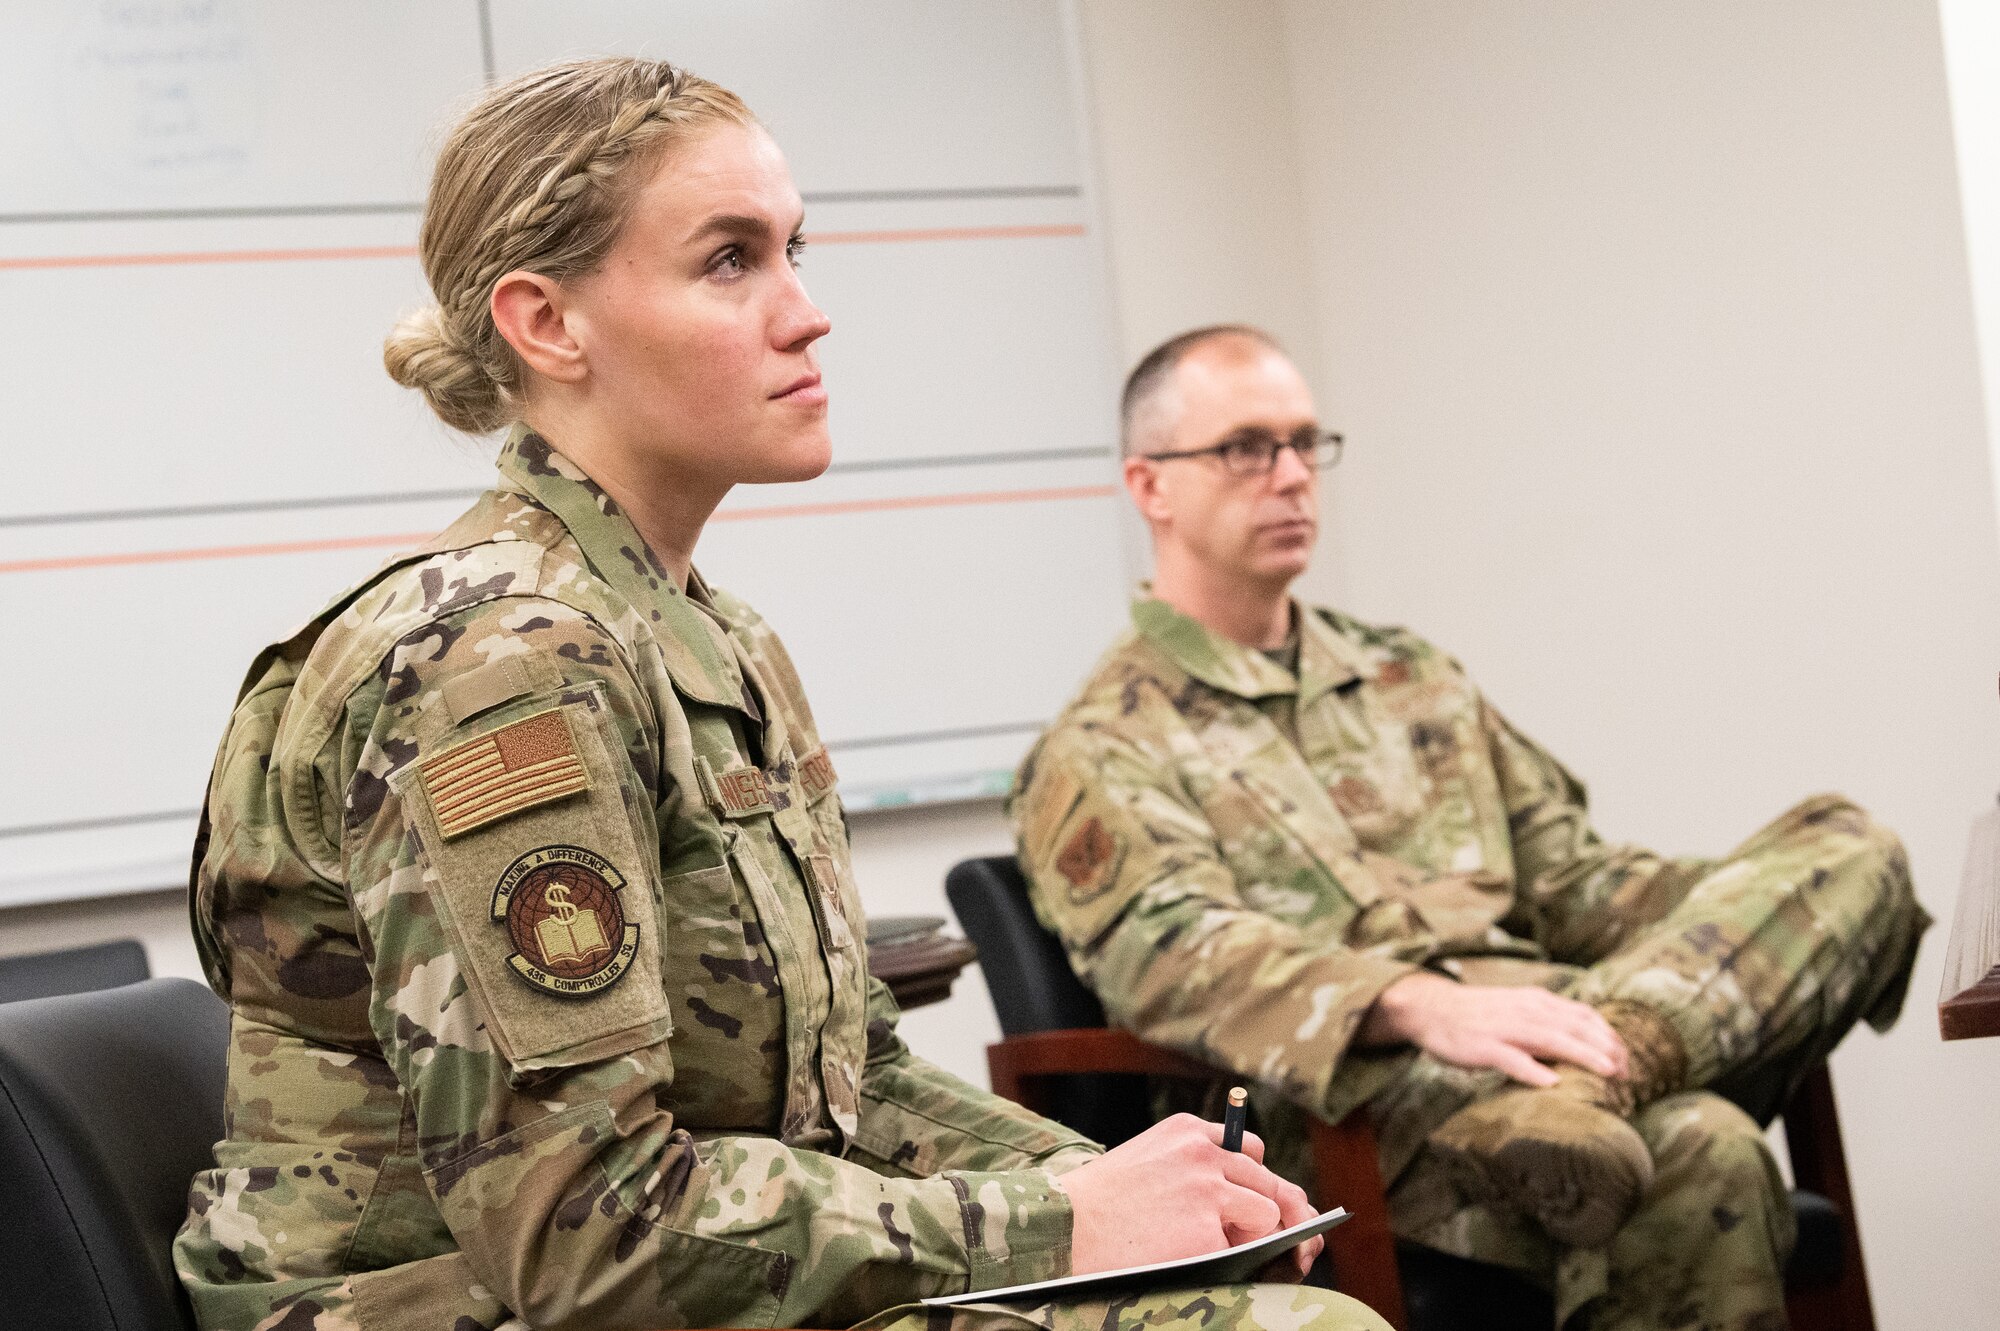 Chief Master Sgt. Timothy Bayes, left, 436th Airlift Wing command chief, discusses office mementoes with Airman 1st Class Shayna Teunissen, 436th Comptroller Squadron budget analyst, at Dover Air Force Base, Delaware, March 16, 2022. Teunissen accompanied Bayes as part of the Chief for the Day mentoring program, which offers Airmen a first-hand experience of the command chief’s typical work day. (U.S. Air Force photo by Mauricio Campino)